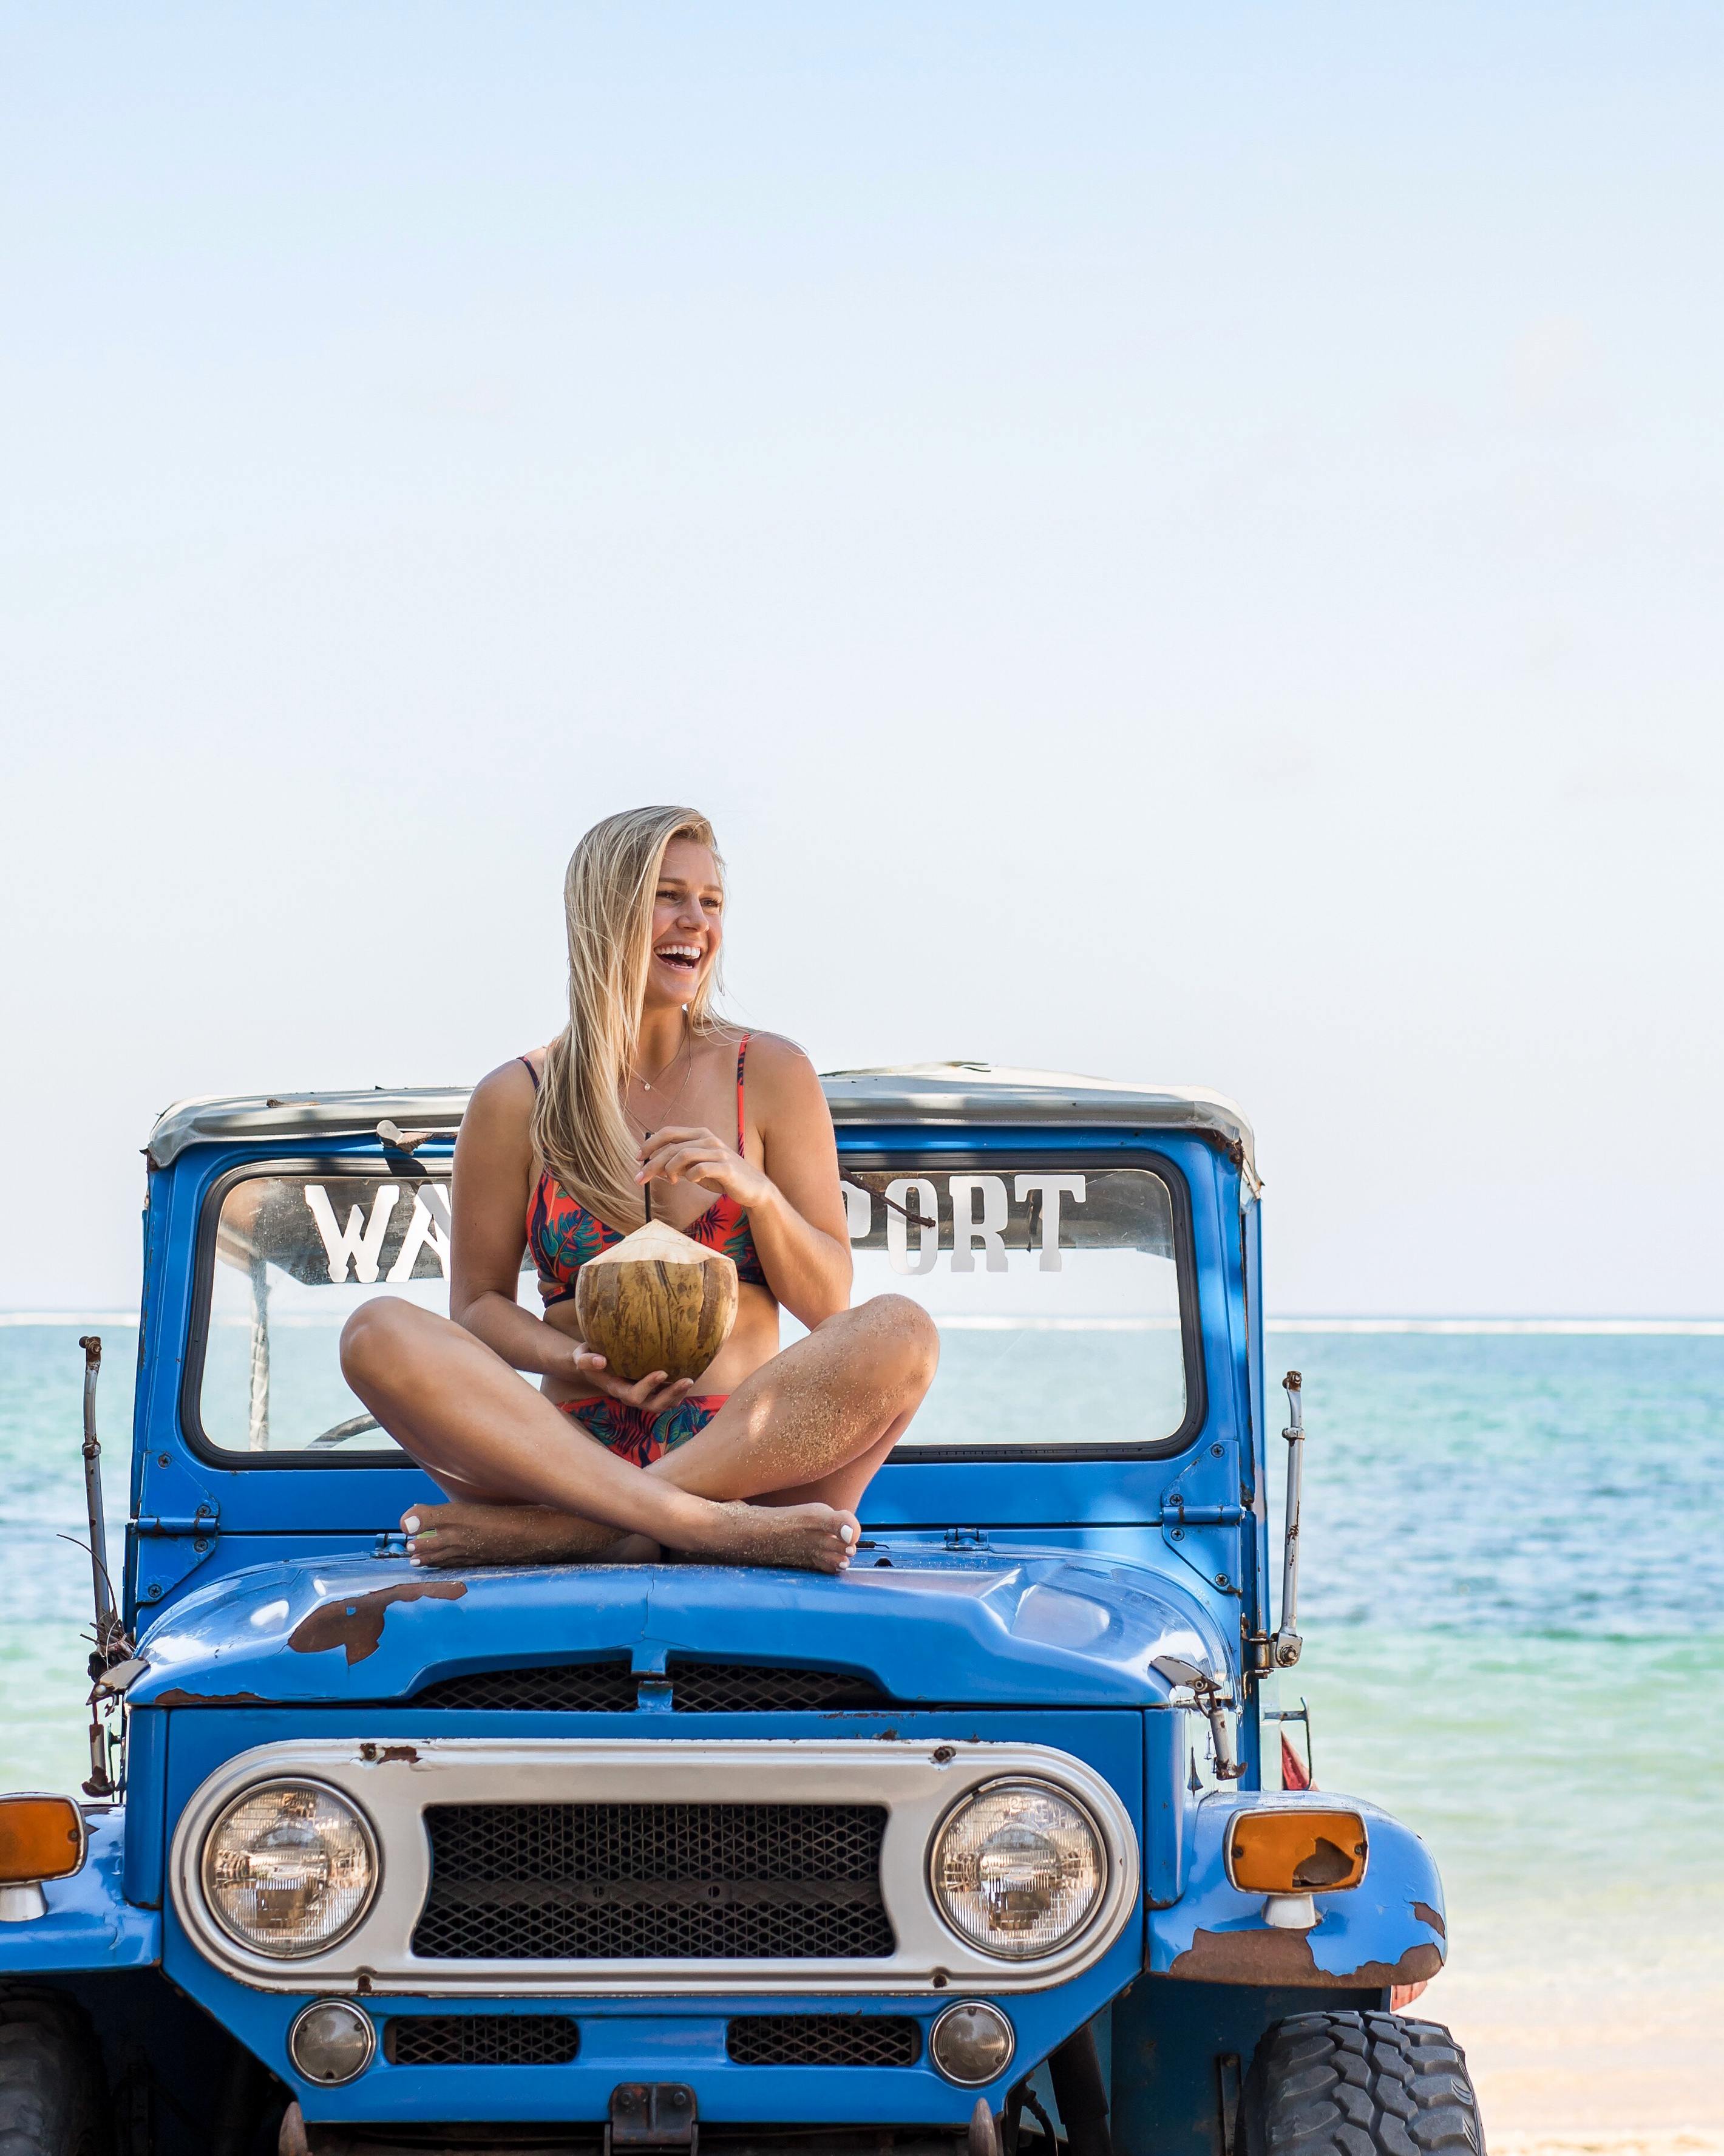 Blogging Retreat in Bali with The Blonde Abroad